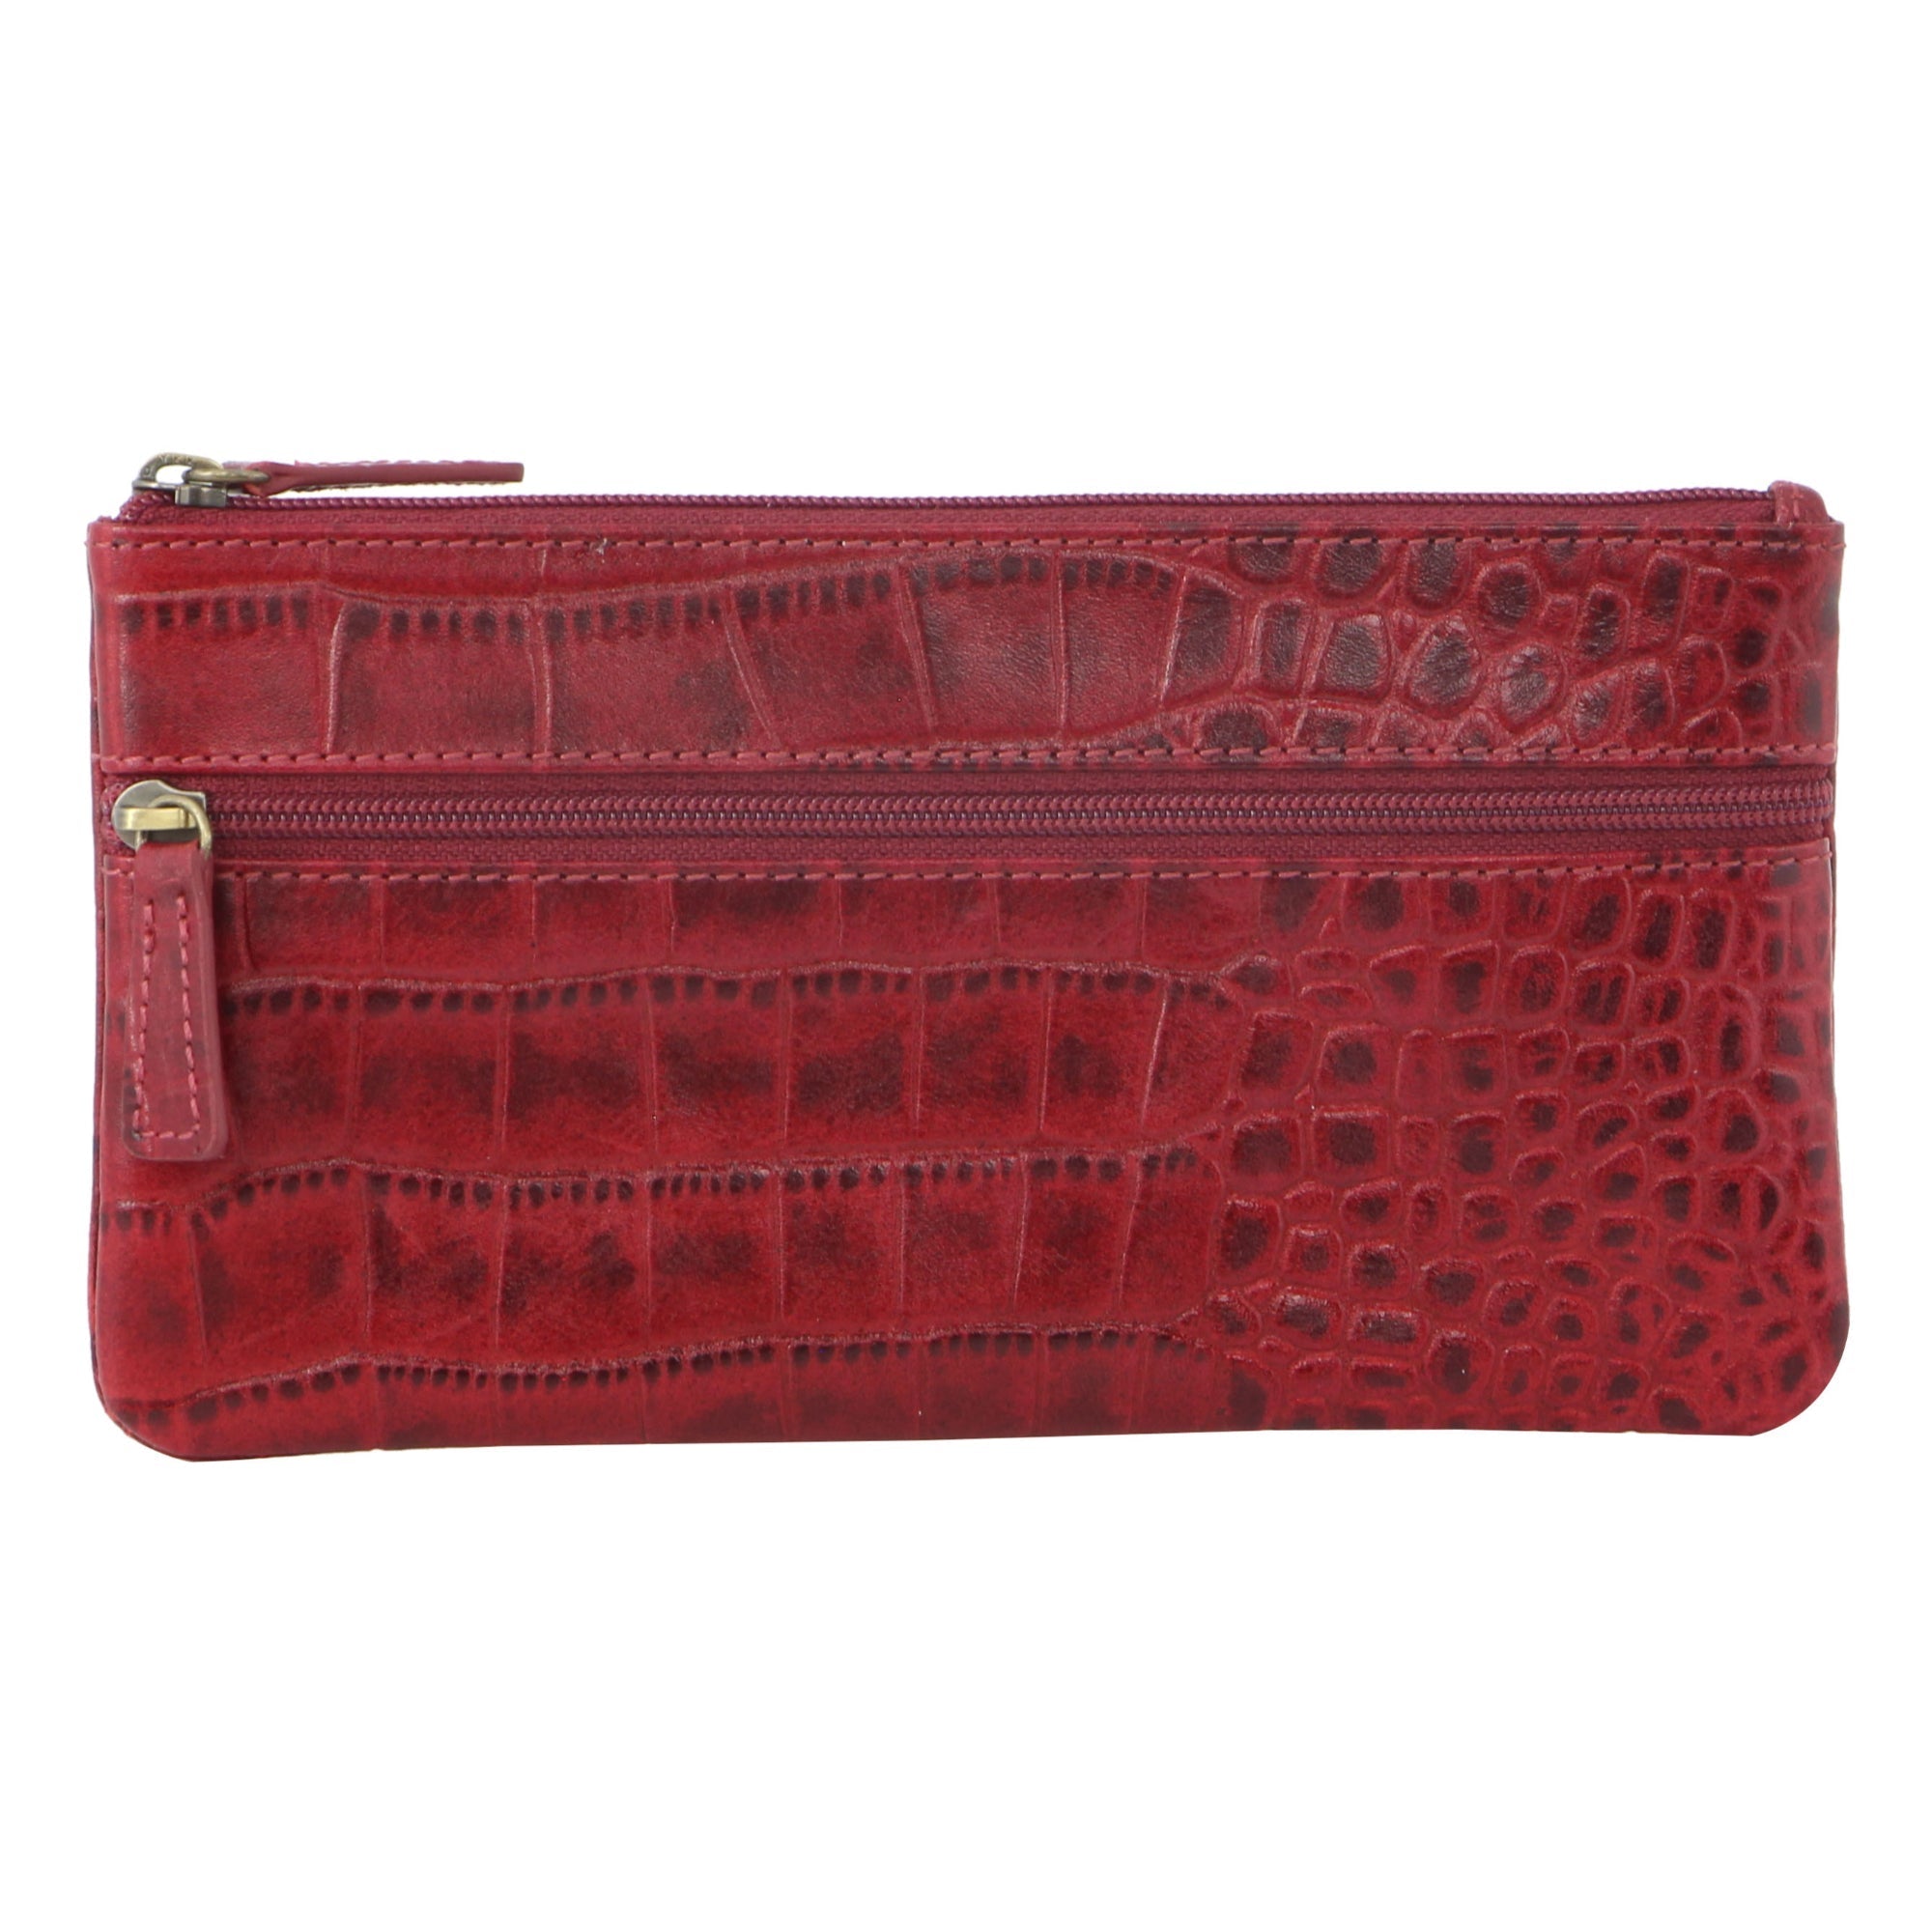 Pierre Cardin Leather Coin Purse/Phone Wallet Case in Red-Croc